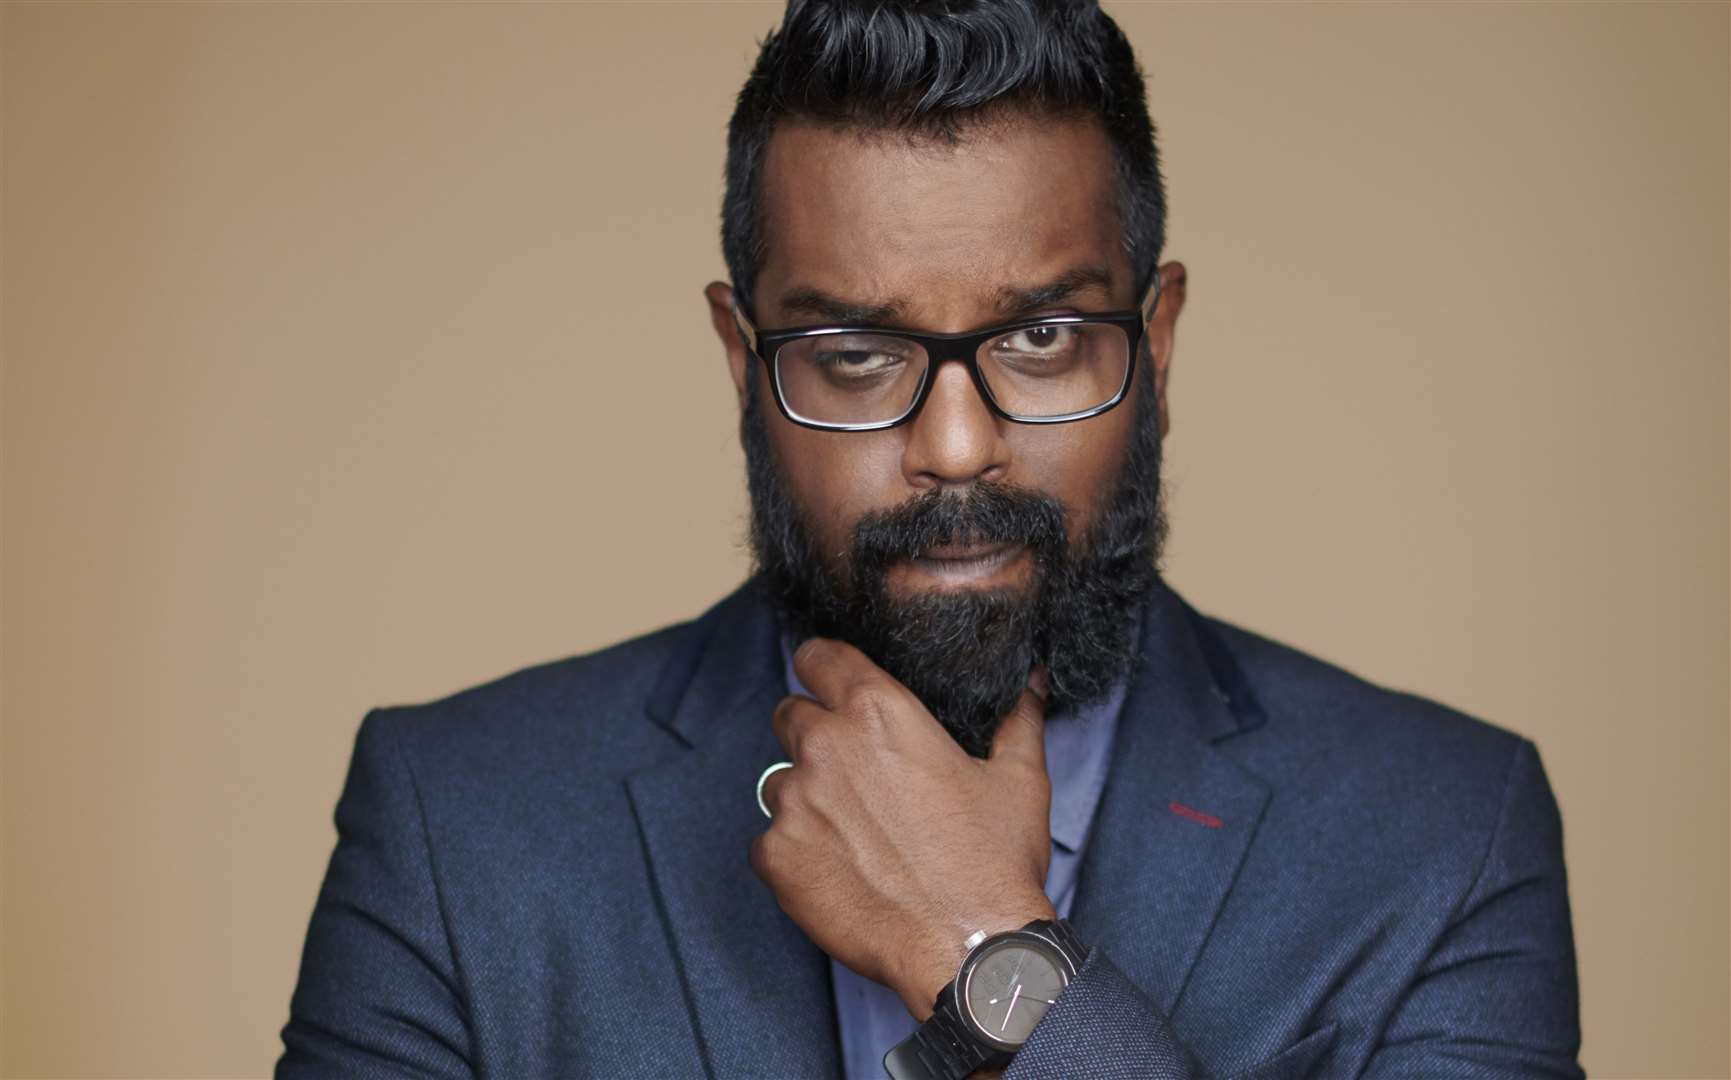 Comedian Romesh Ranganathan is one of the performers who will no longer be appearing at the venue